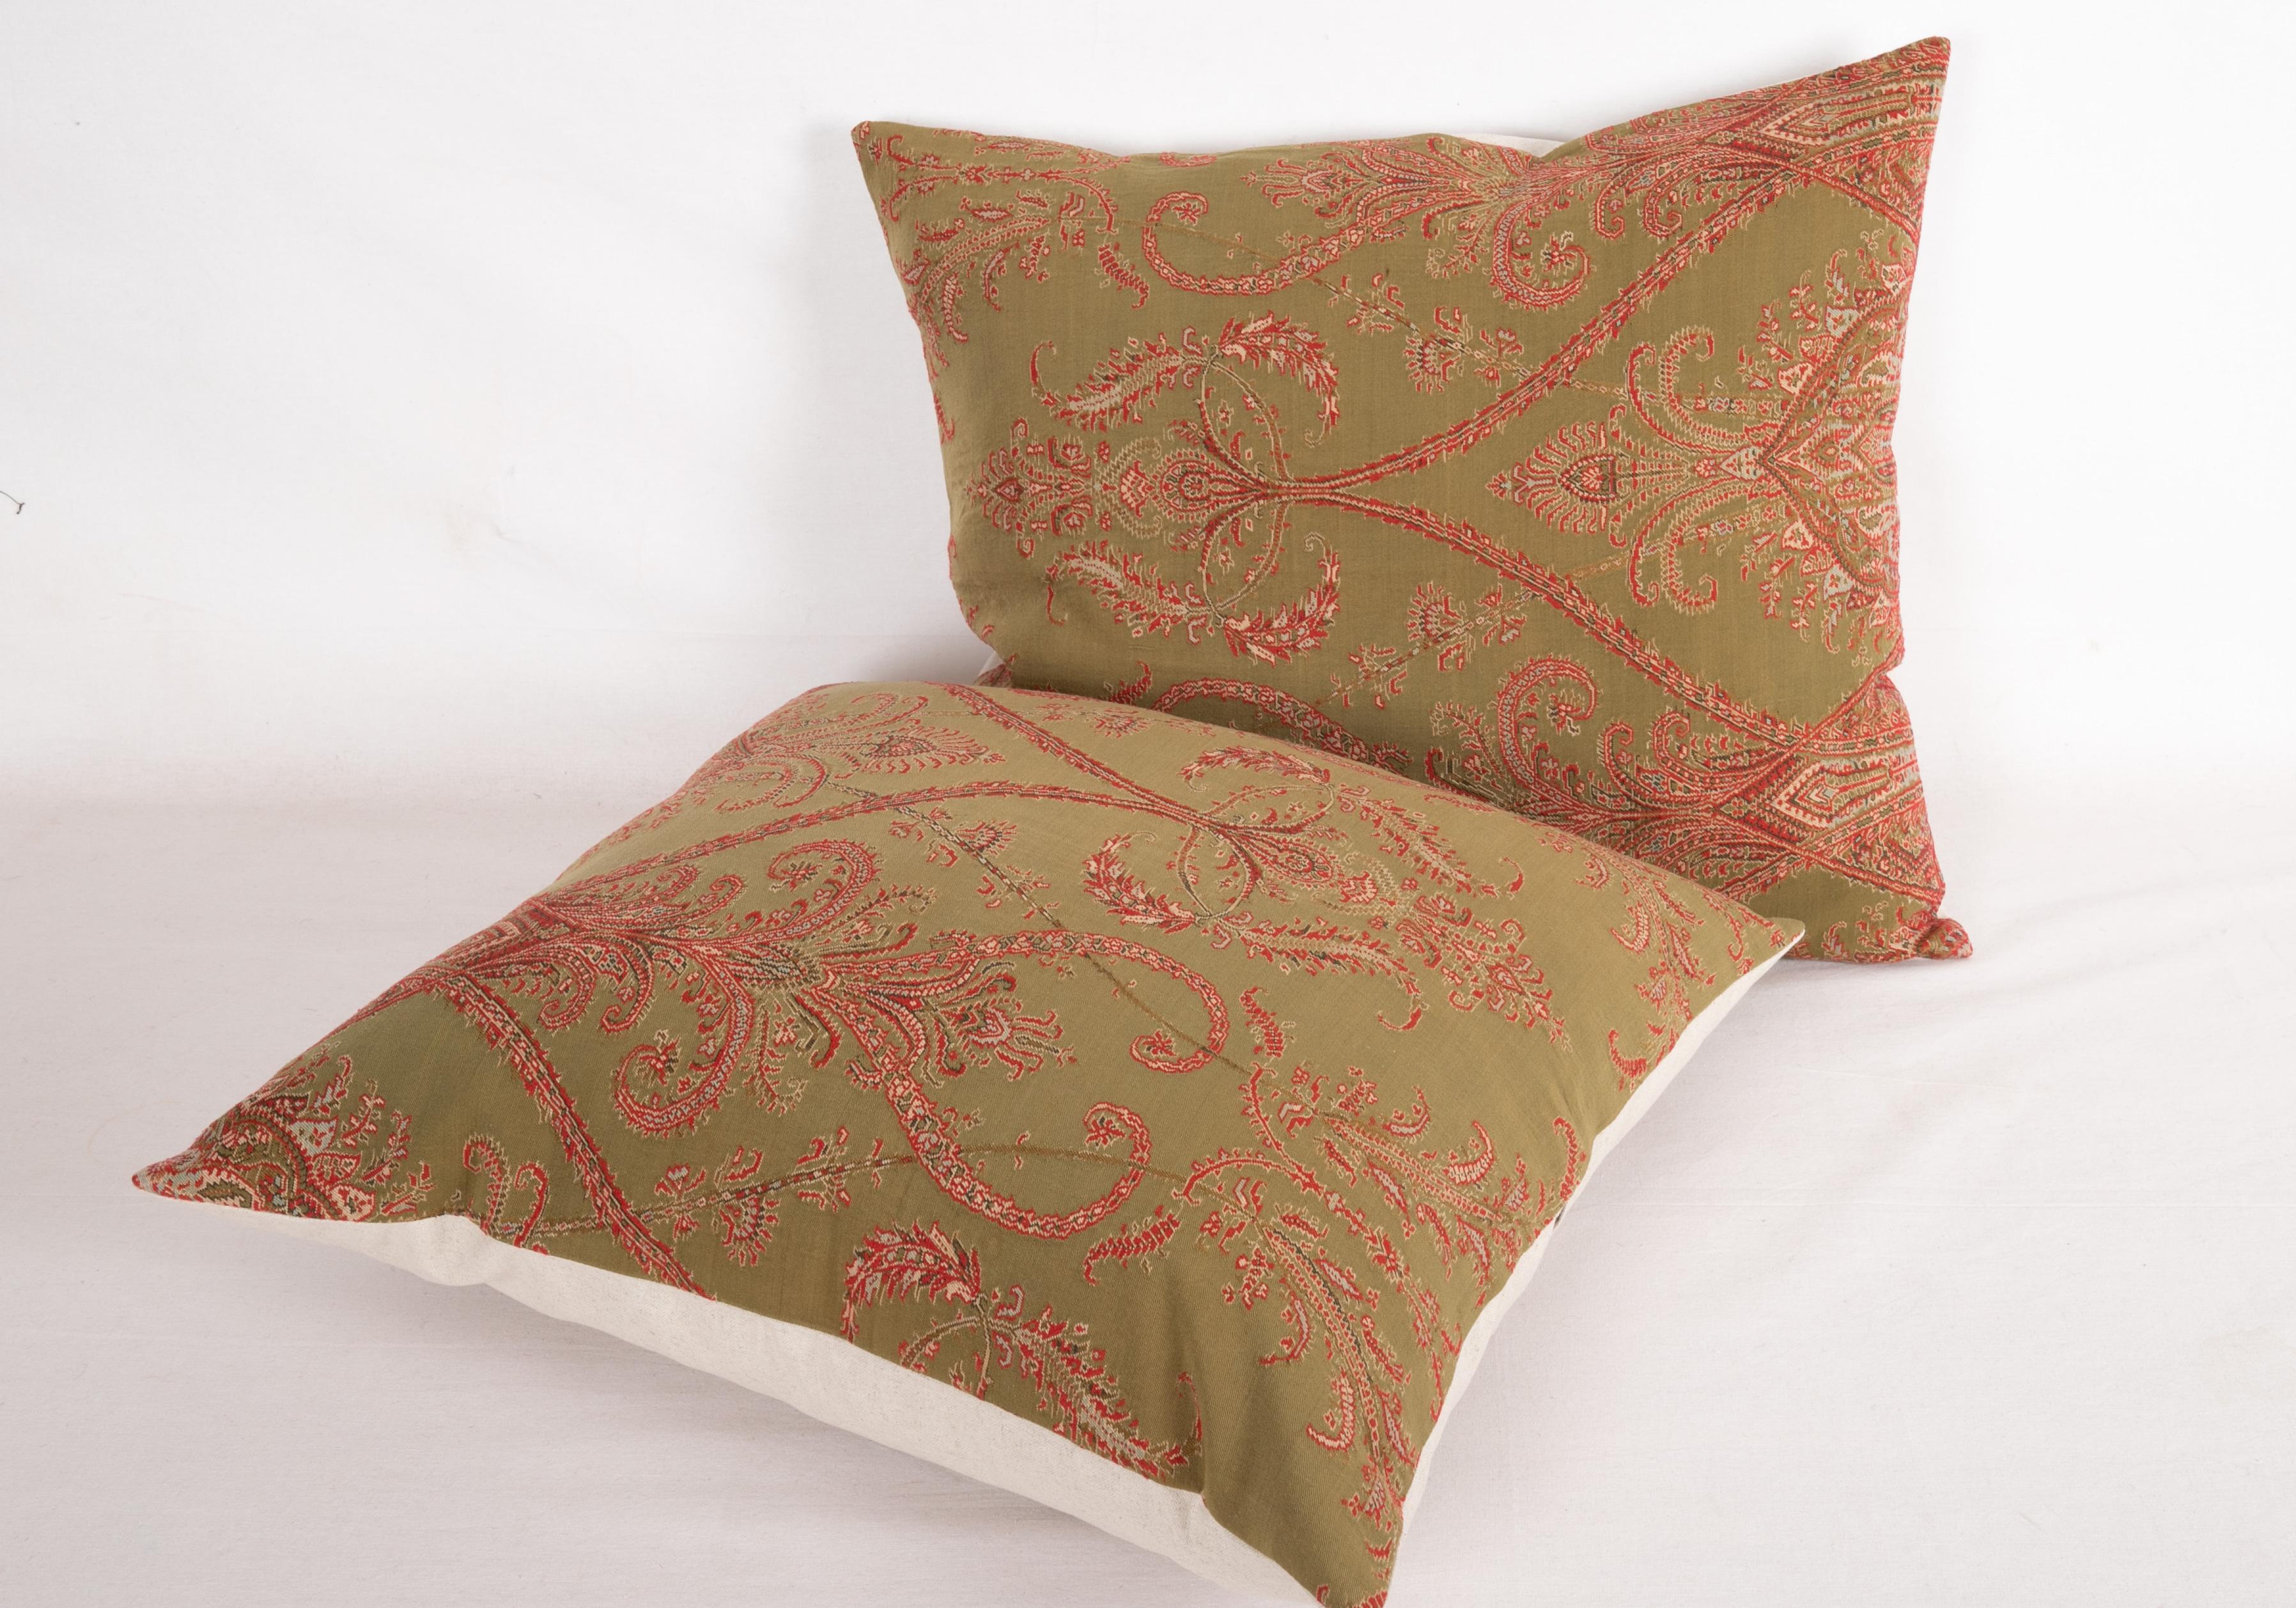 Woven Antique Paisley Wool Pillow Cases, 19th Century For Sale